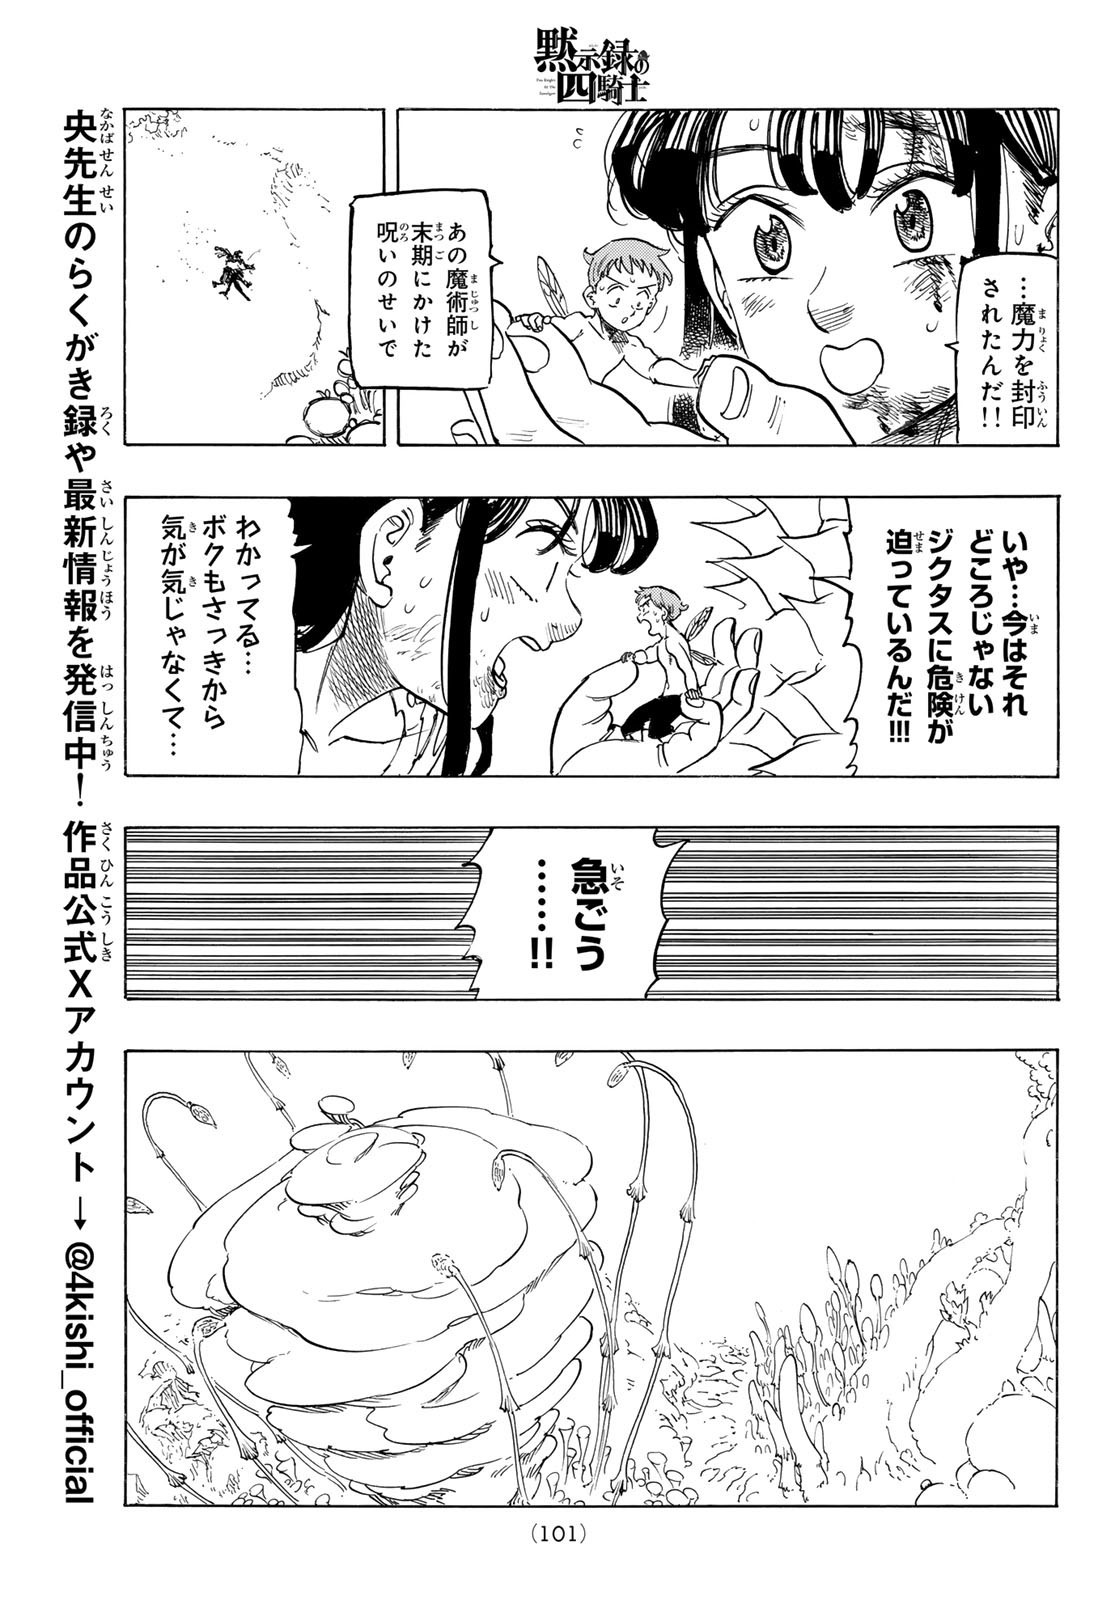 Weekly Shōnen Magazine - 週刊少年マガジン - Chapter 2024-23 - Page 99